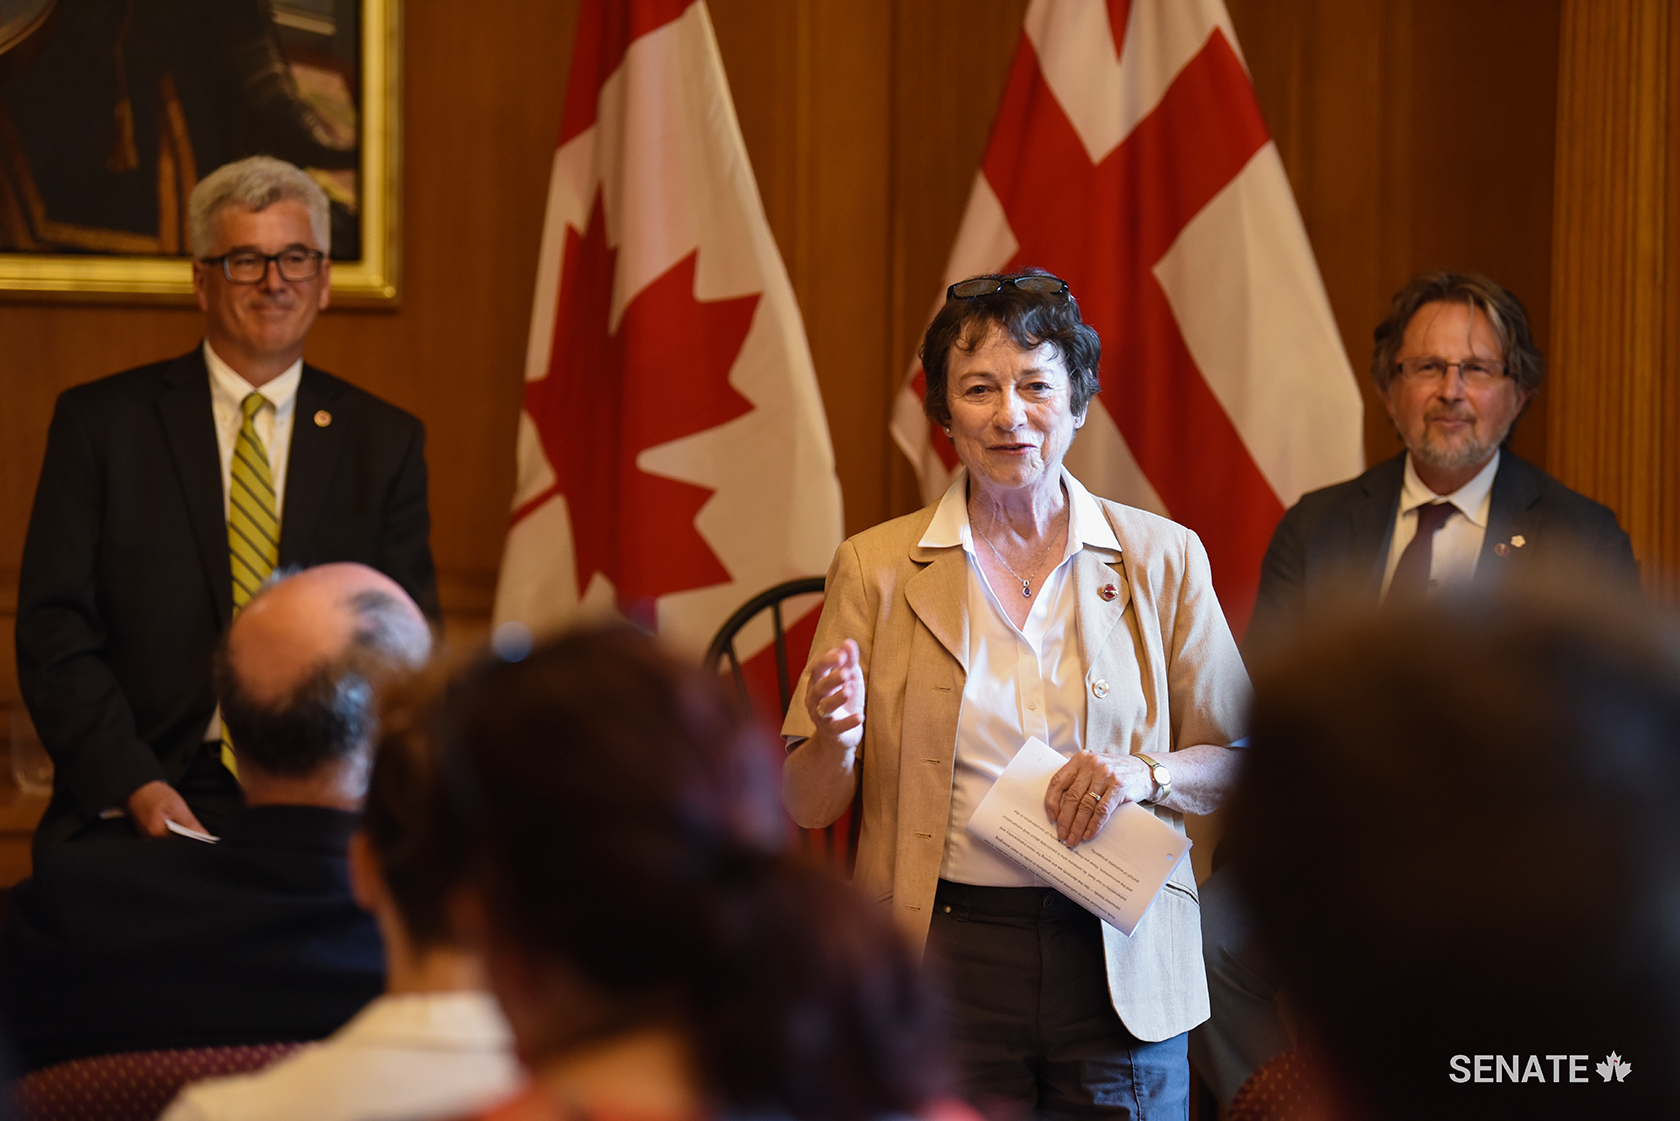 Senators Colin Deacon, Diane Griffin and Stan Kutcher host a seminar at Halifax’s Dalhousie University on how to increase the economic value of agriculture on July 16, 2019.